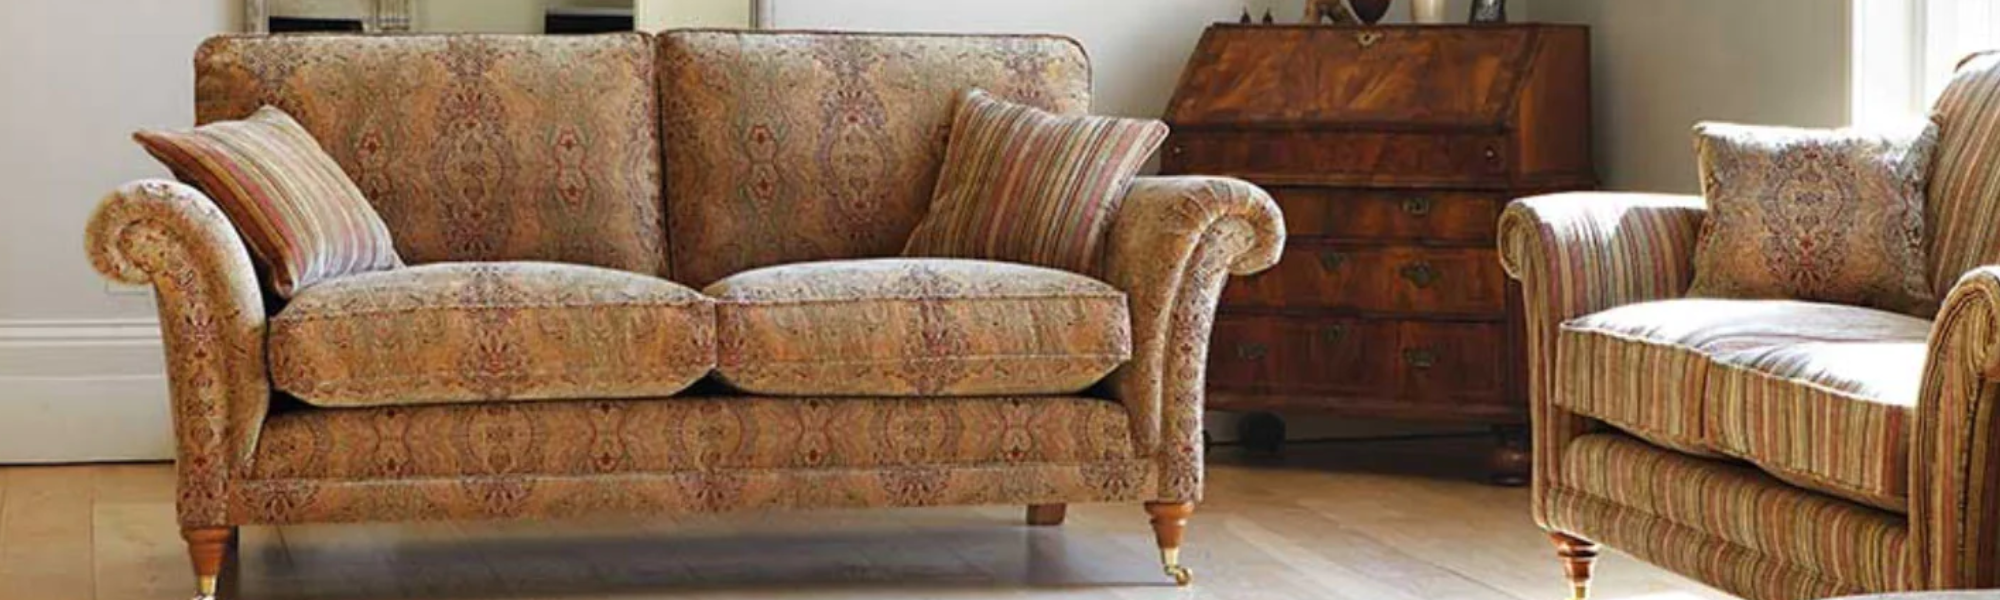 Parker Knoll Upholstery At Kenneth, Parker Knoll Style Sofa Bed